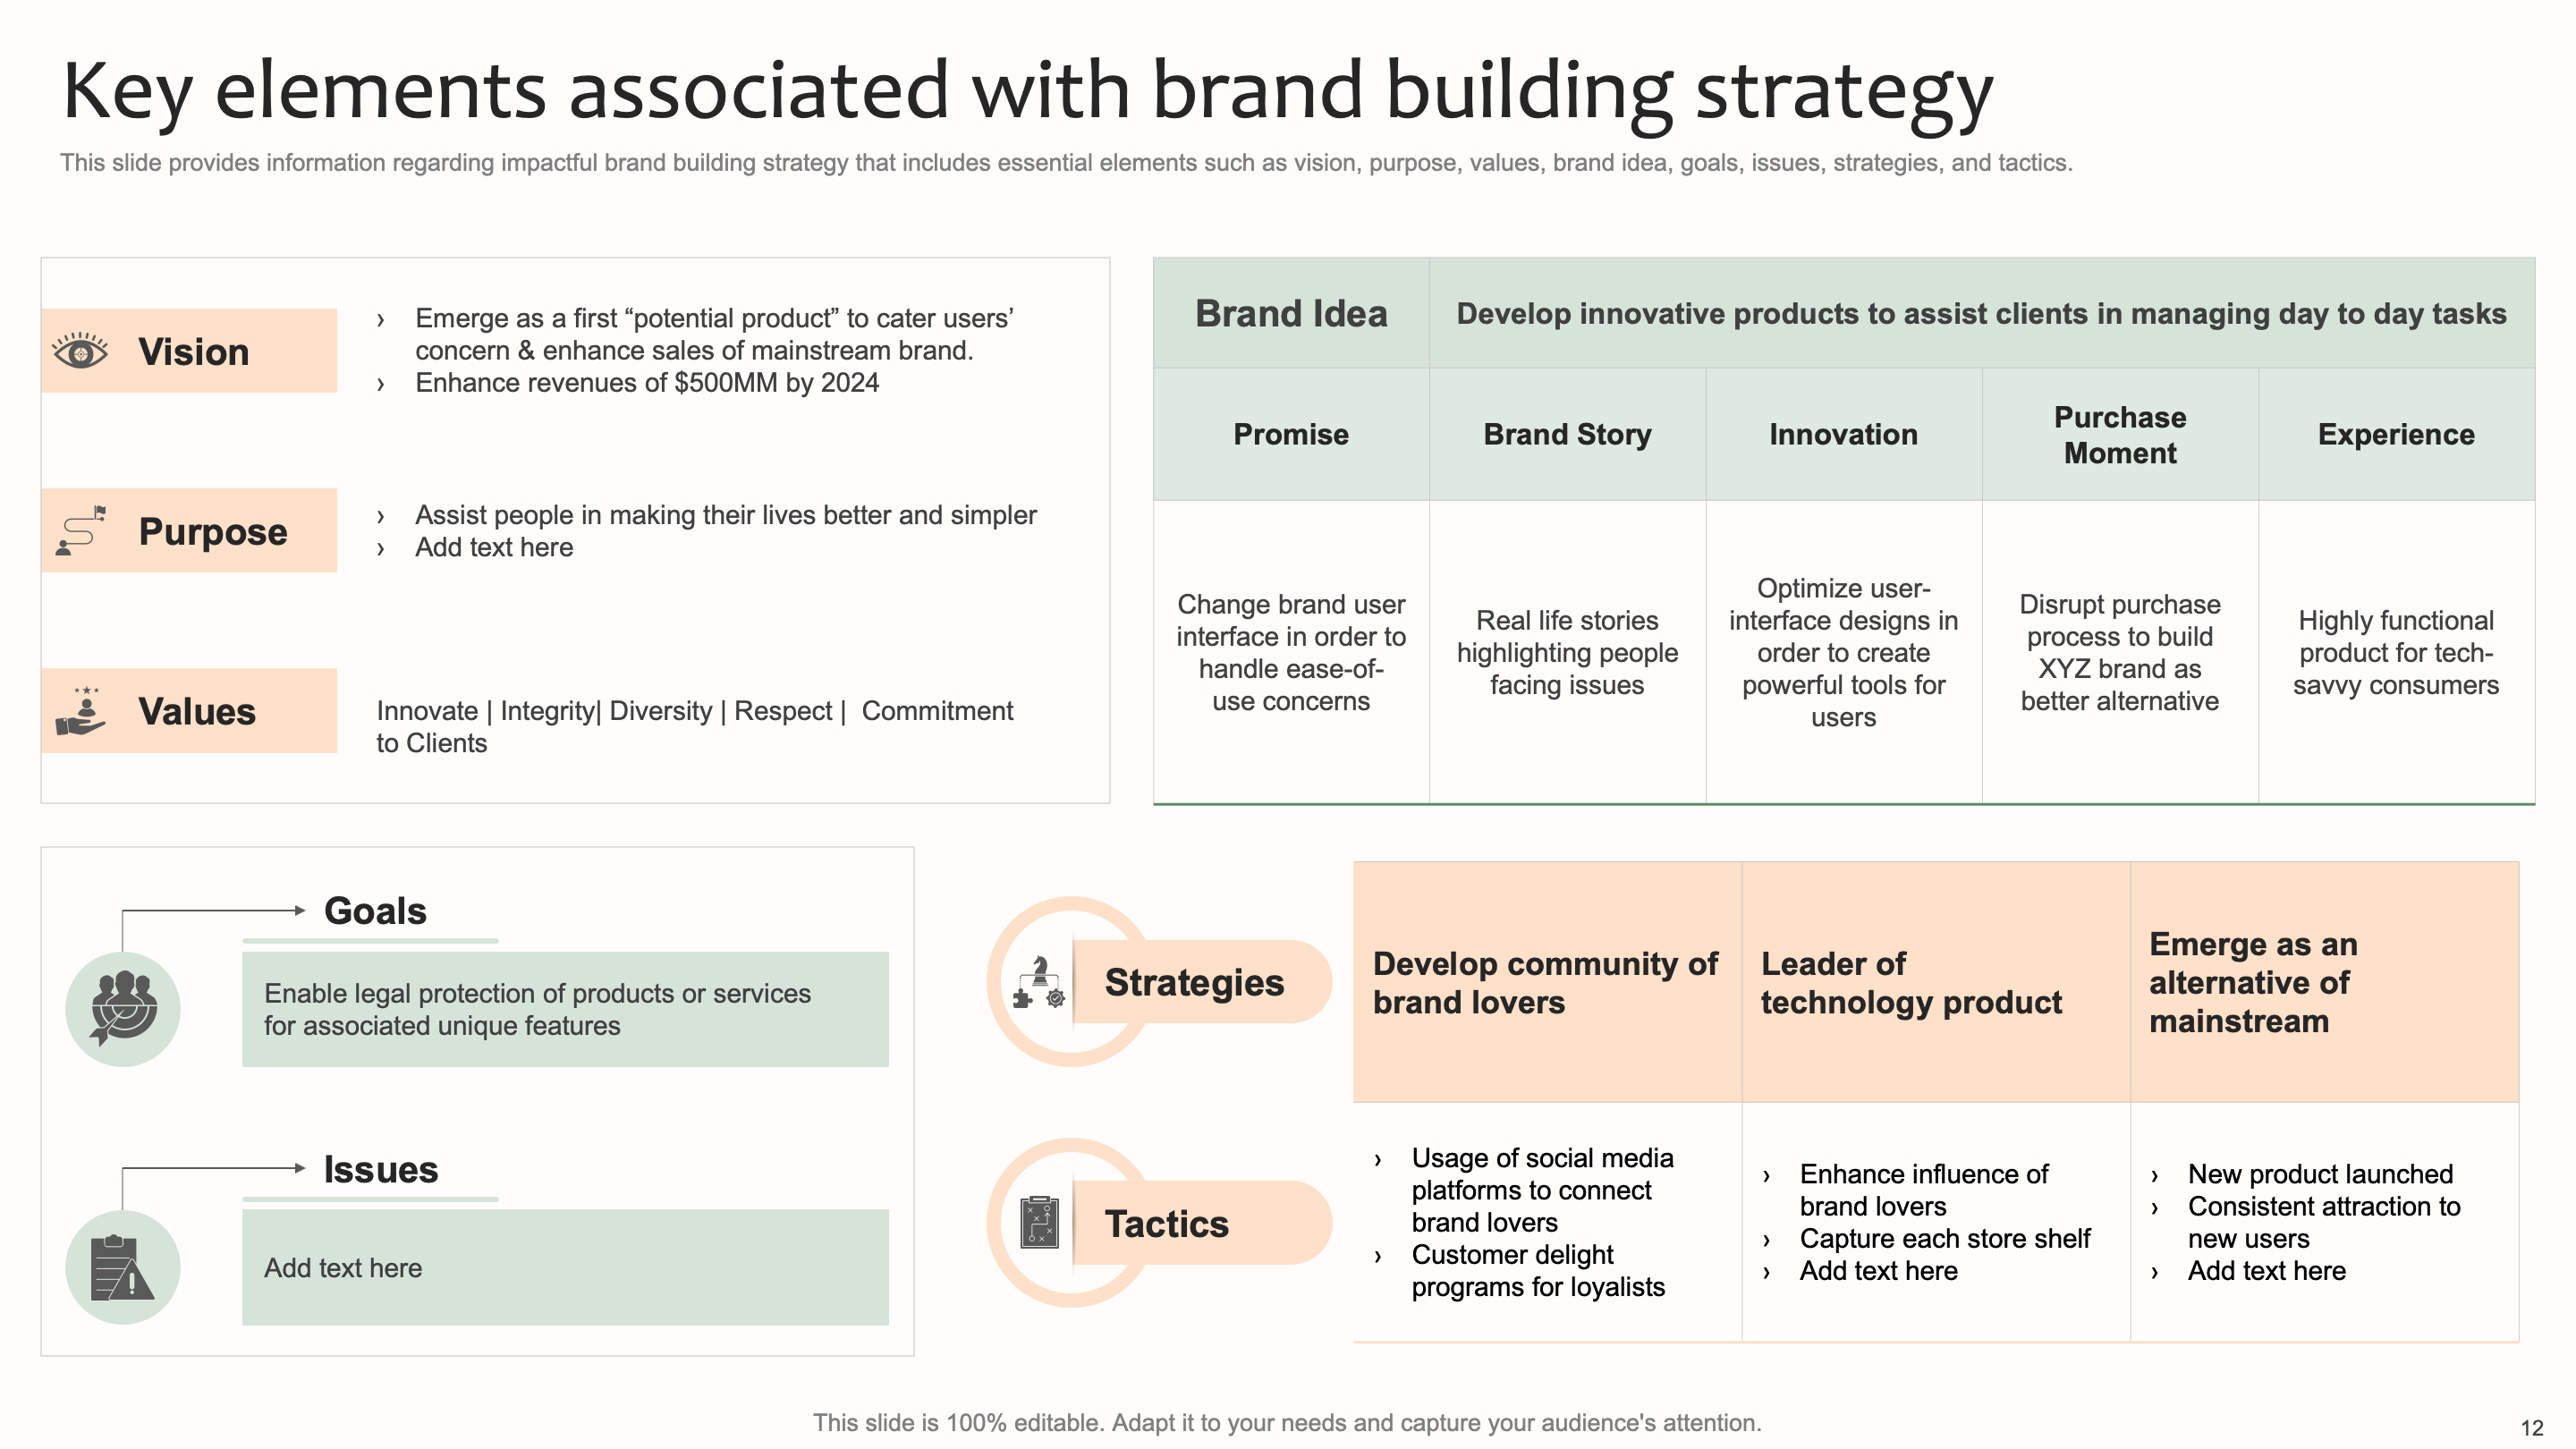 Key Elements Associated with Brand Building Strategy 